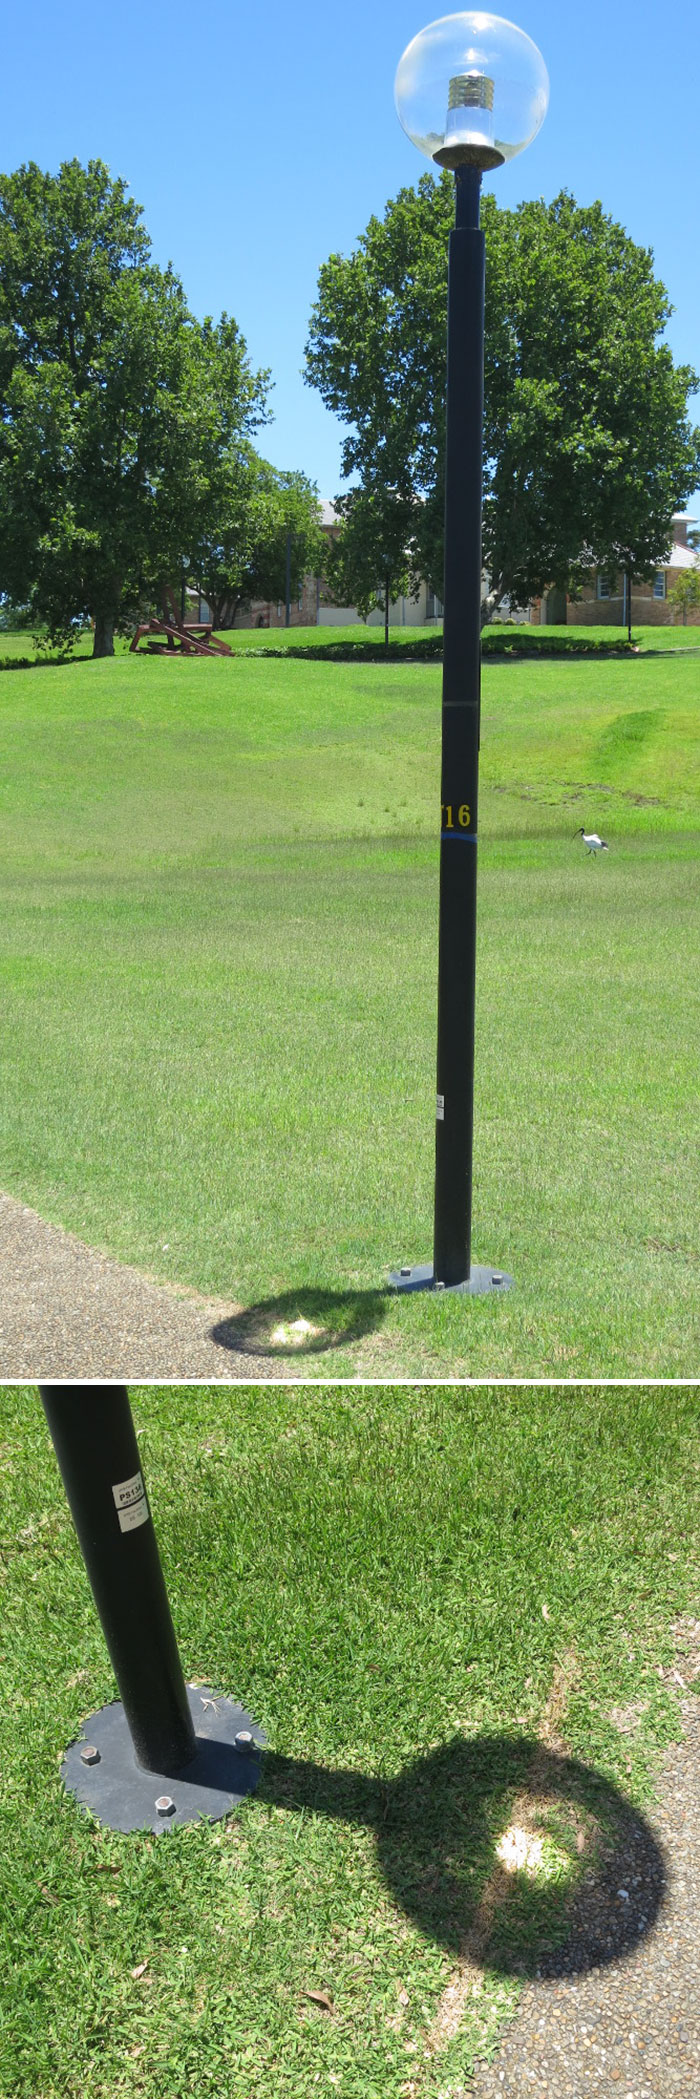 This Lamppost Focuses The Sun And Scorchers A Line In The Grass